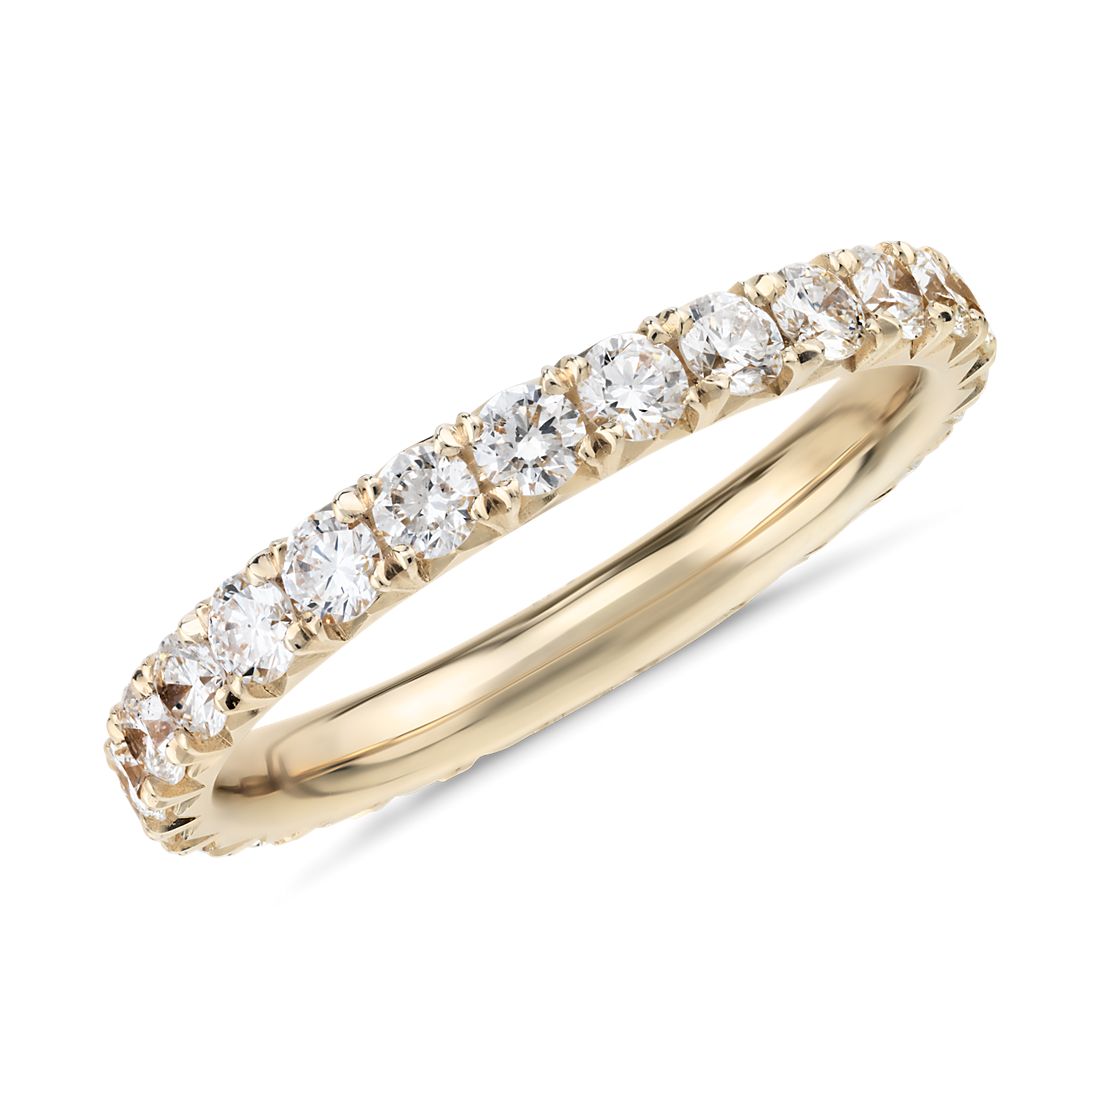 French Pavé Diamond Eternity Ring in 14k Yellow Gold (0.96 ct. tw.)